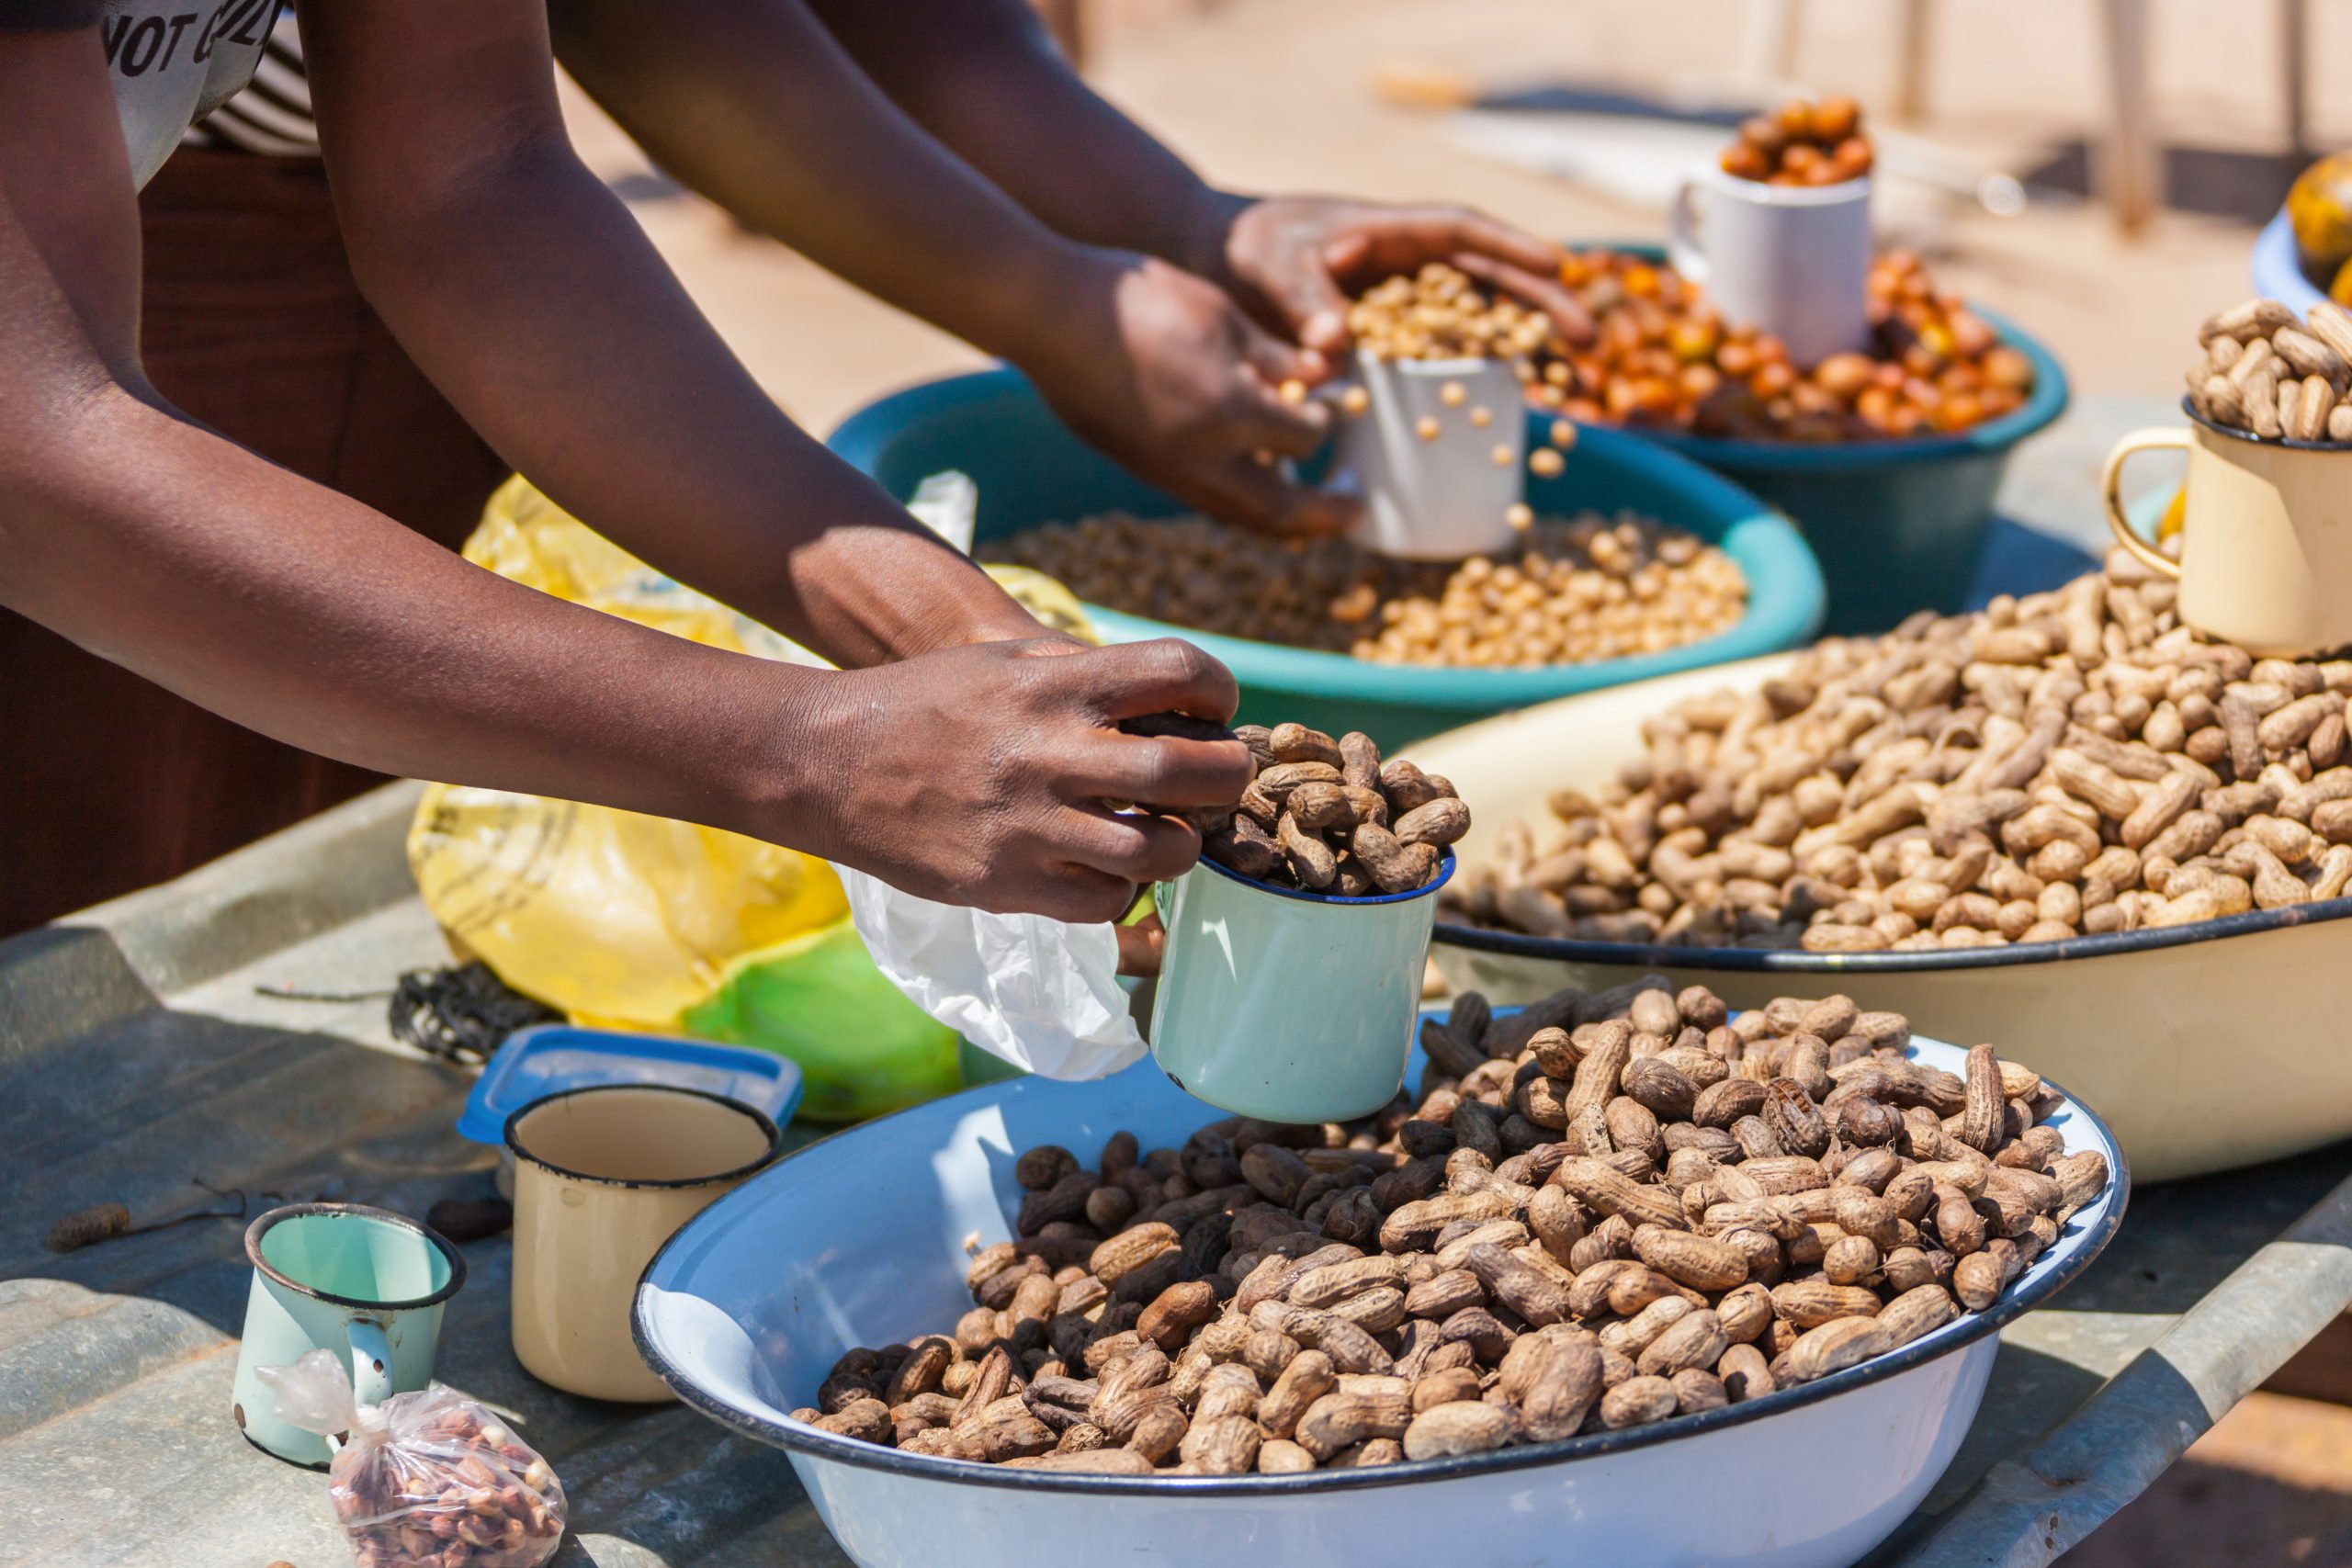 Funding for UK and African organisations to address AgriFood challenges in Africa